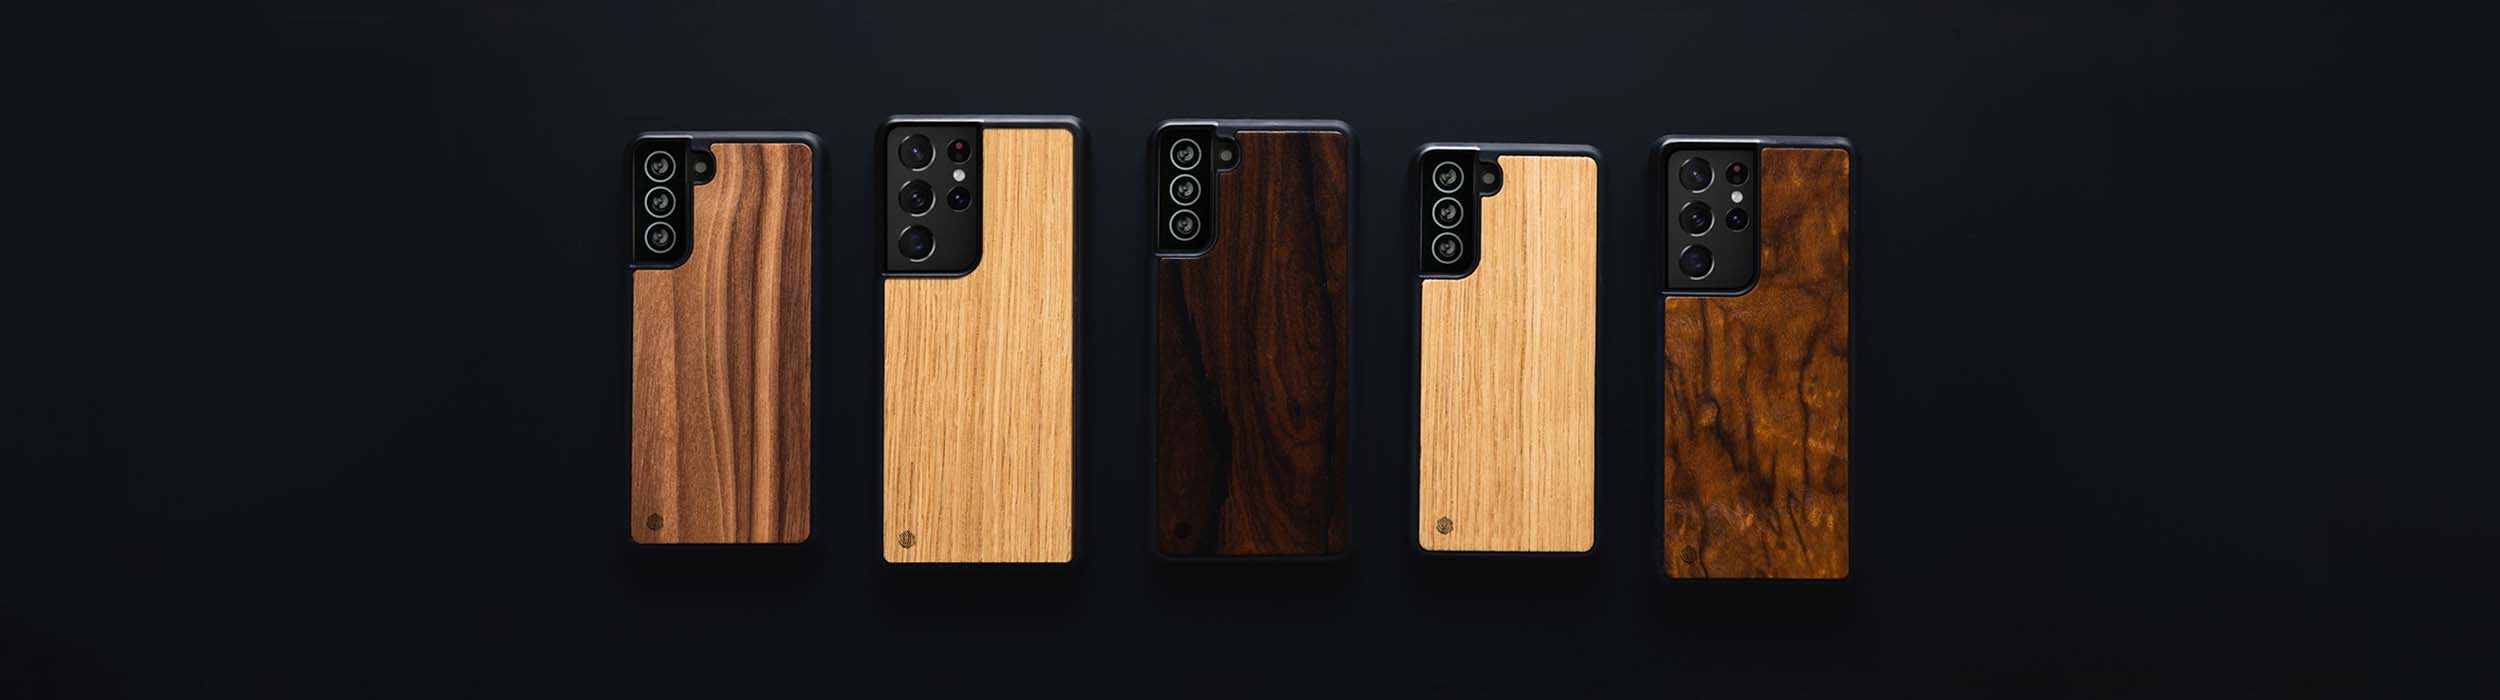 Samsung Galaxy S20 ULTRA Wooden Phone Cases